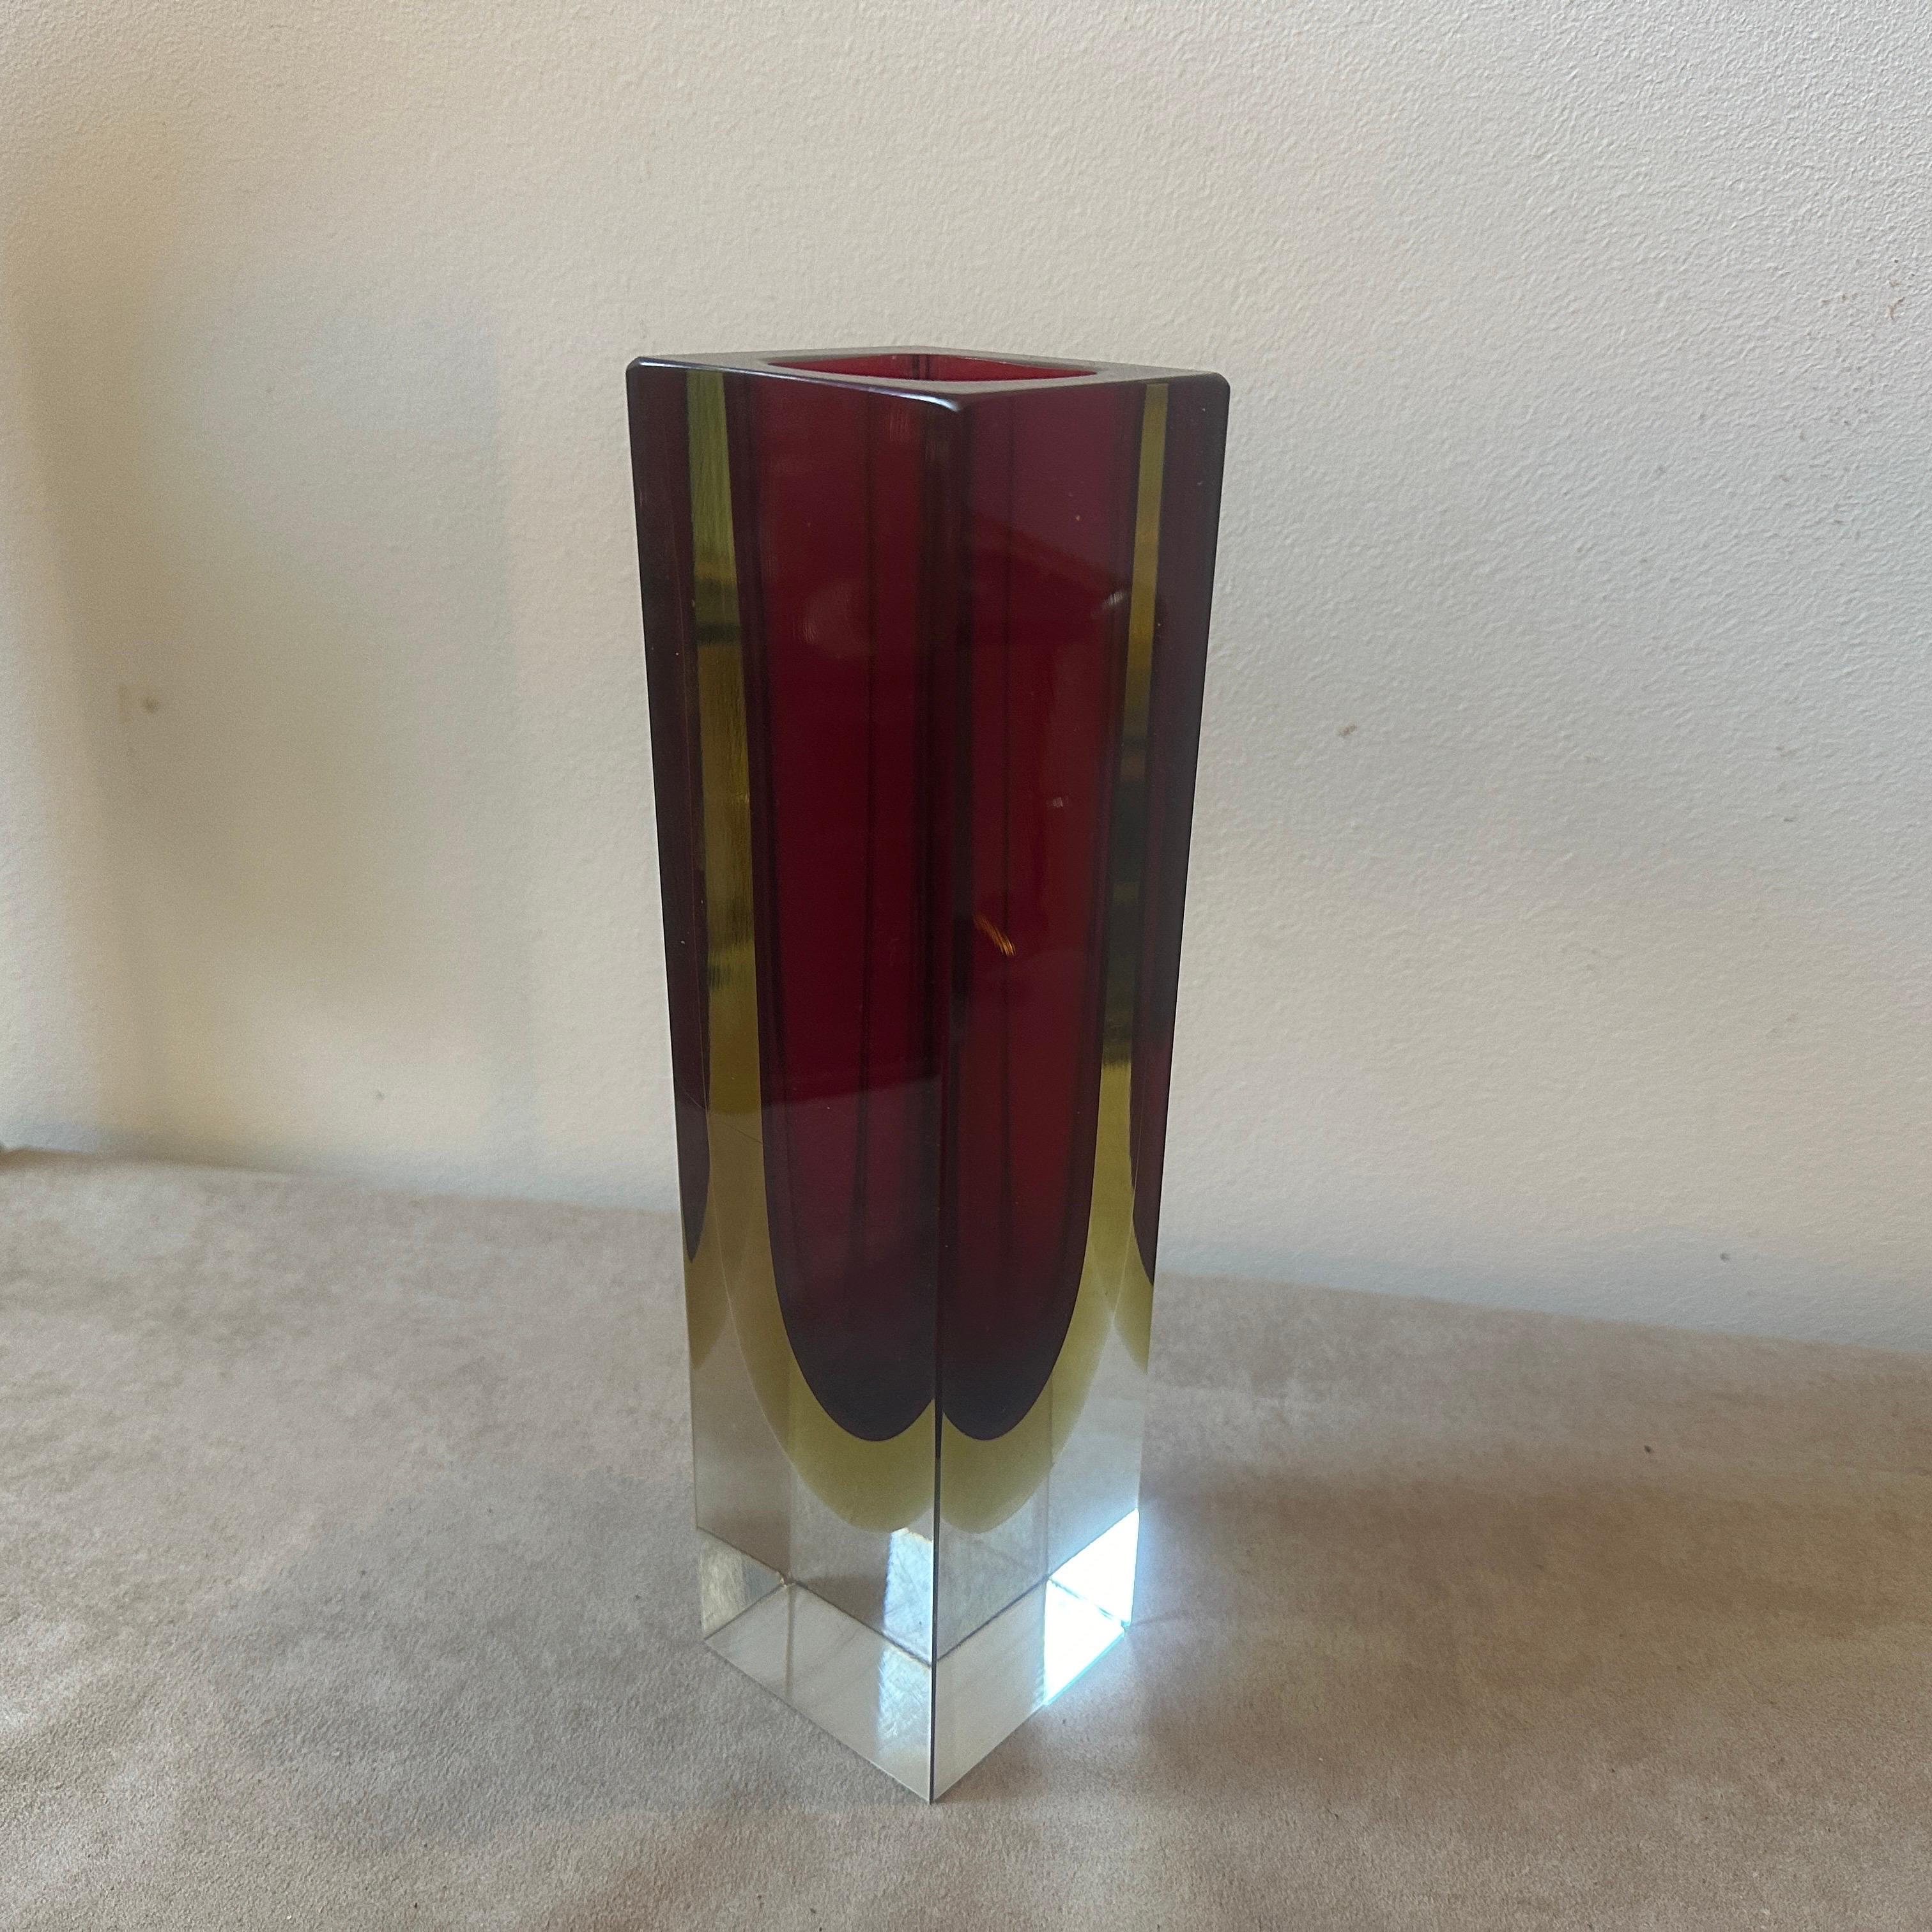 1960s, Modernist Red and Yellow Sommerso Murano Glass Square Vase by Seguso For Sale 1